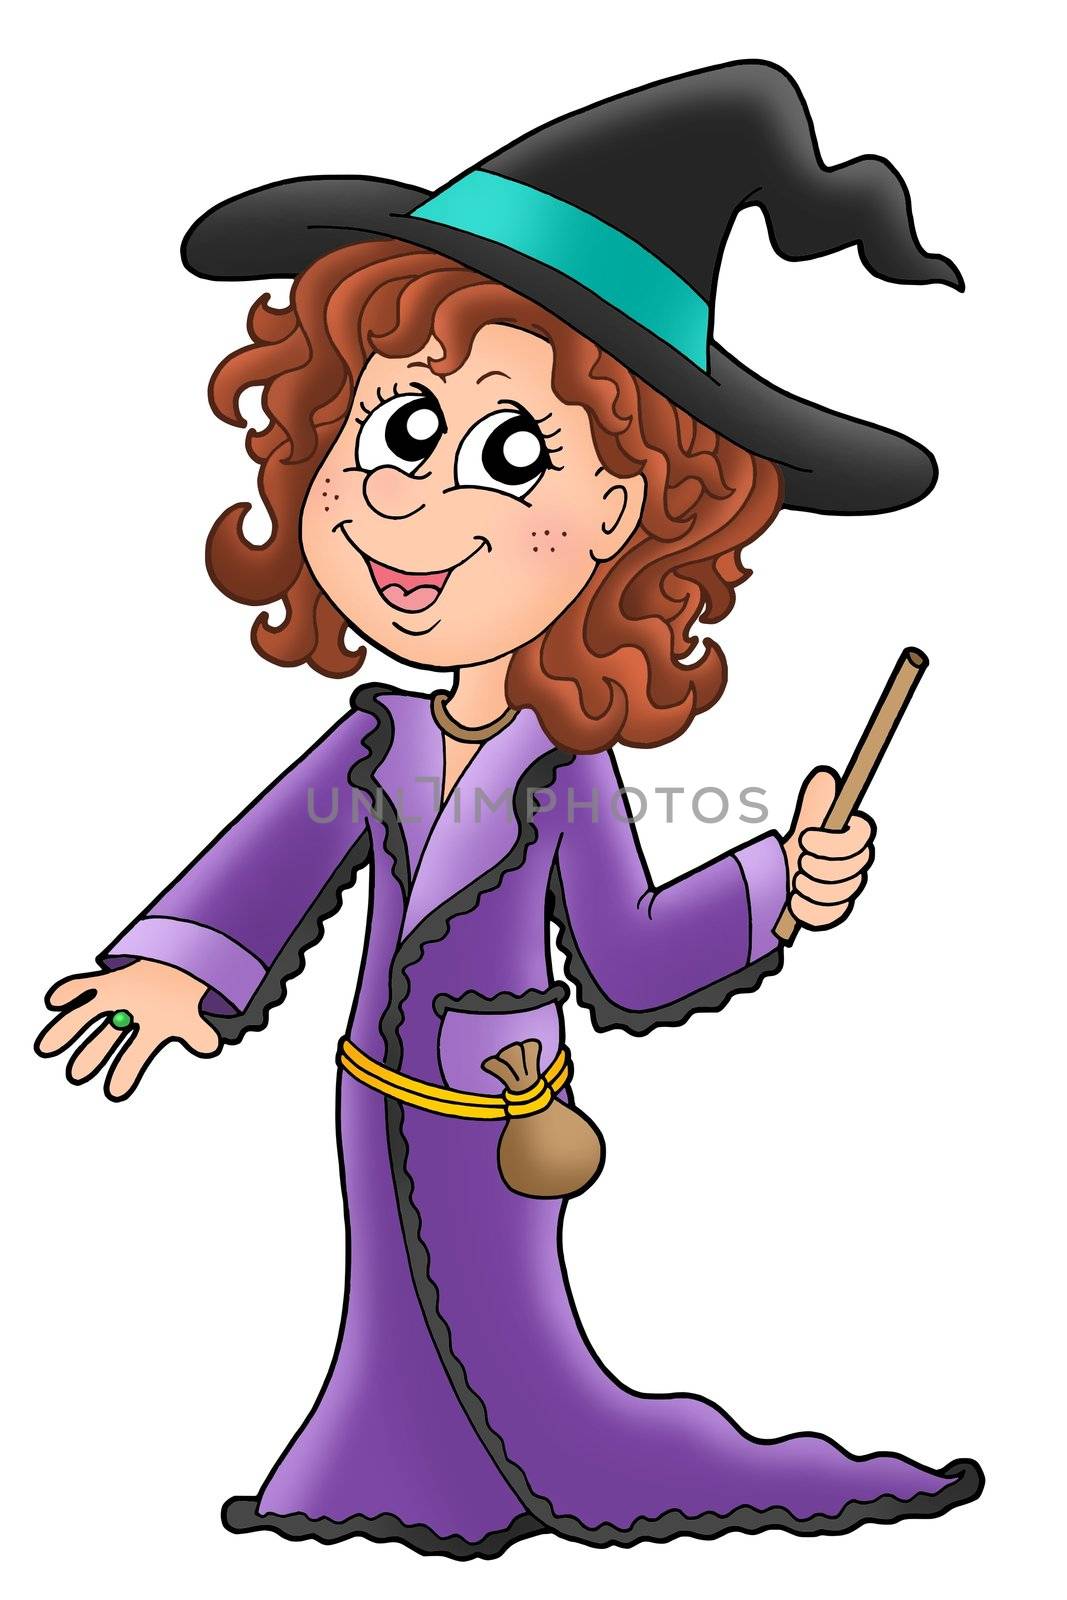 Cute witch with wand - color illustration